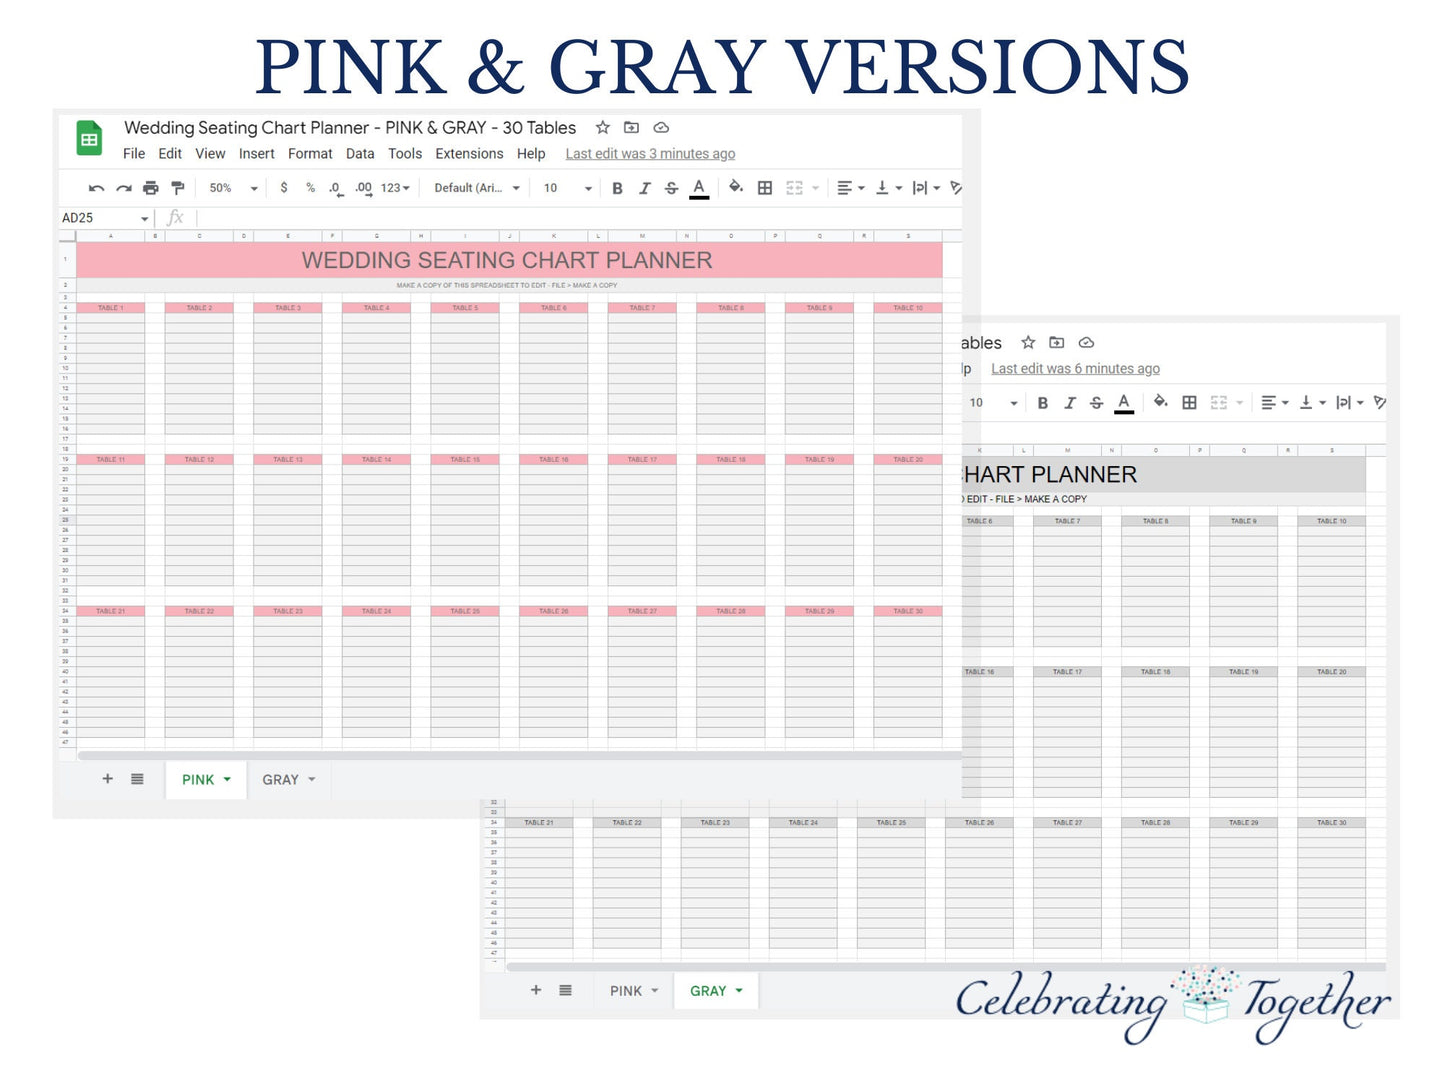 Wedding seating chart planner, Google Sheets template printable, digital download event planning, table arrangements templates